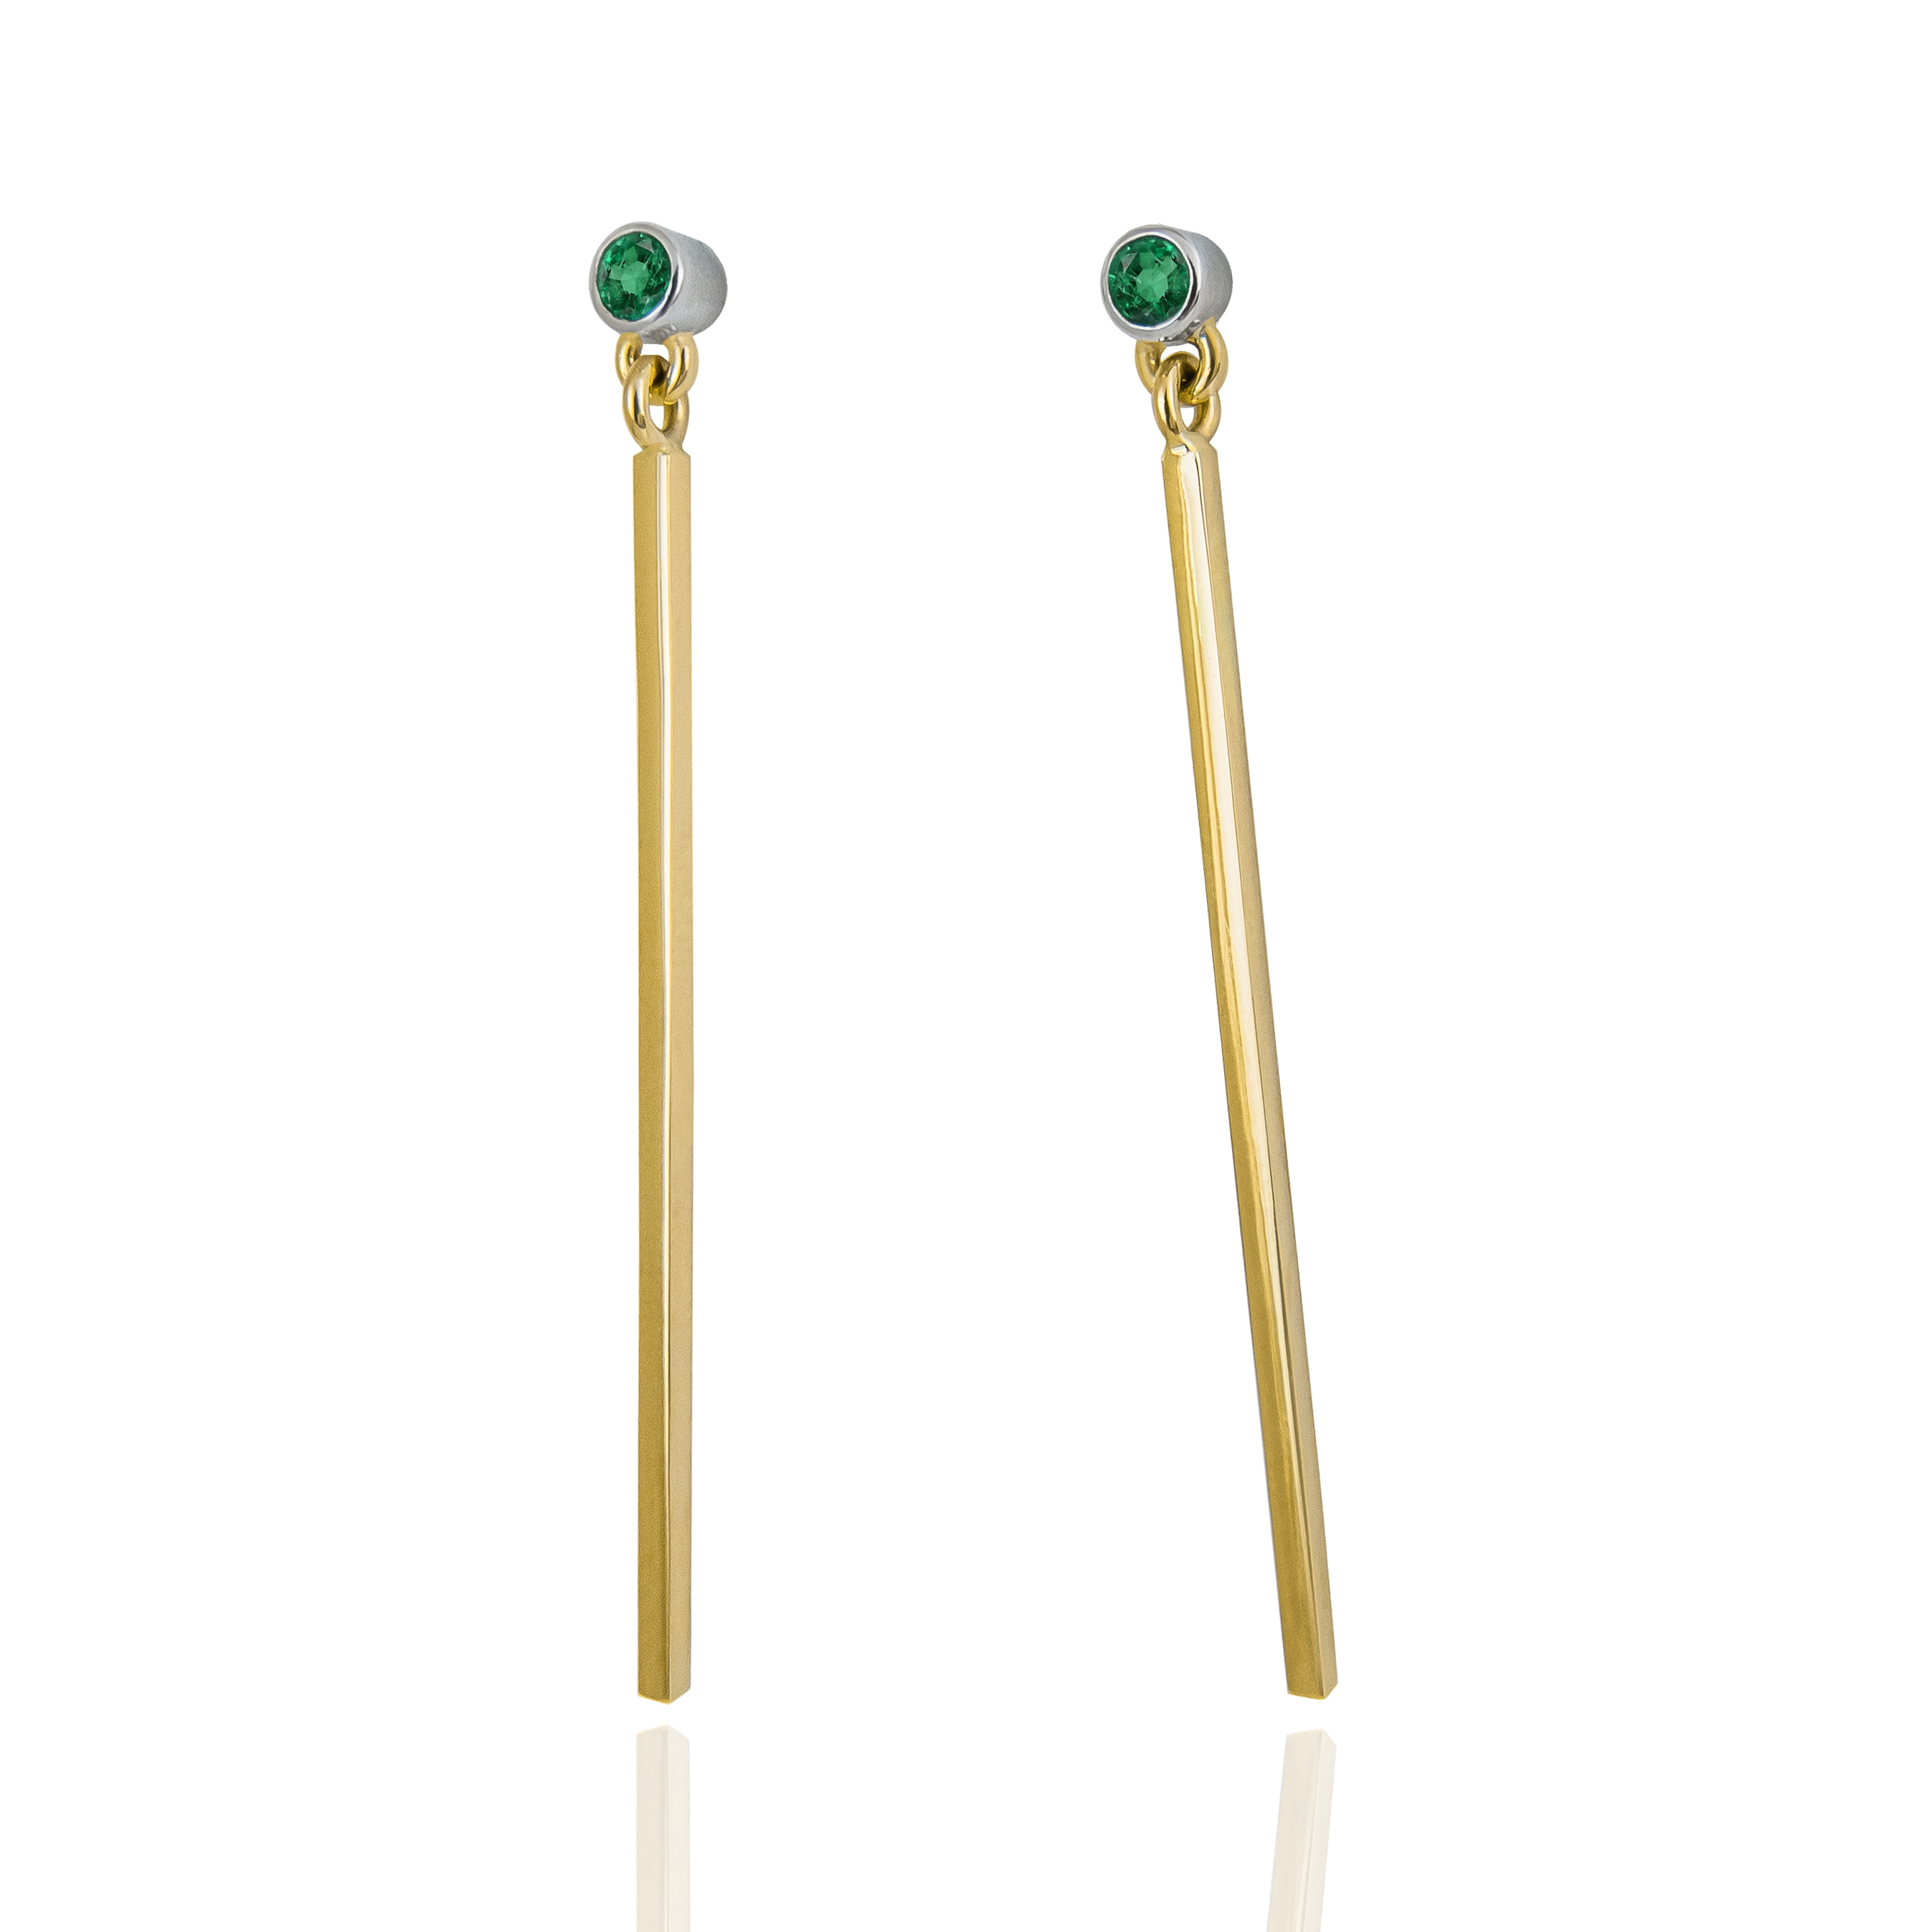 gold sticks with emerald